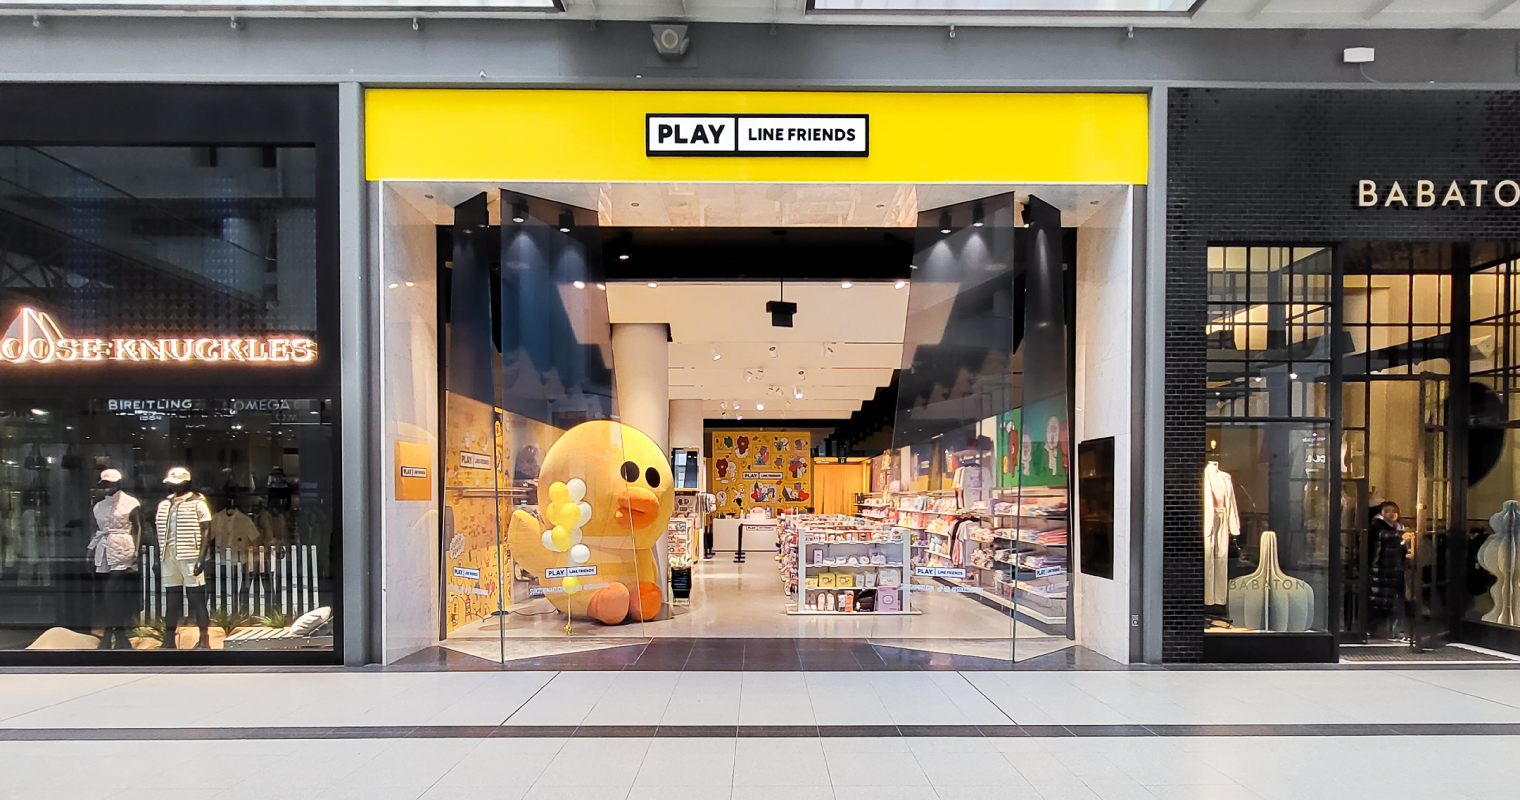 PLAY LINE FRIENDS is Back in Toronto! PLAY LINE FRIENDS TORONTO AT TORONTO EATON CENTRE STOREFRONT